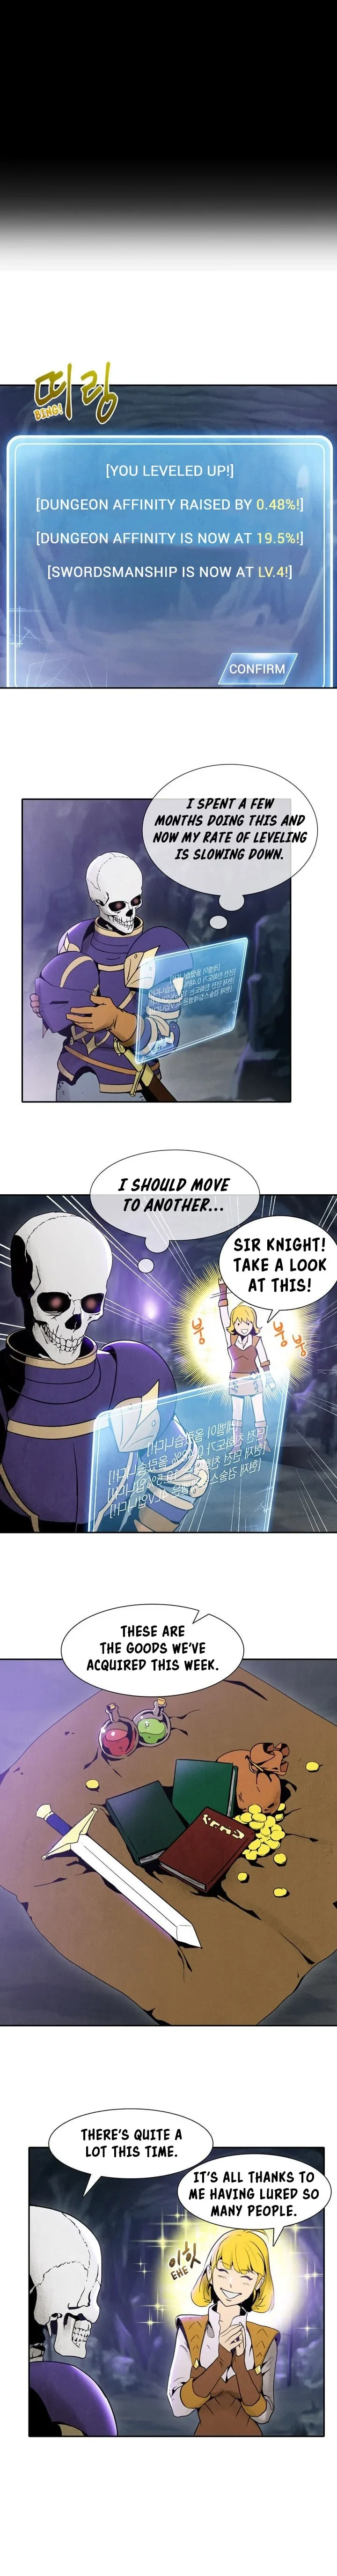 skeleton-soldier-couldnt-protect-the-dungeon-chap-8-2